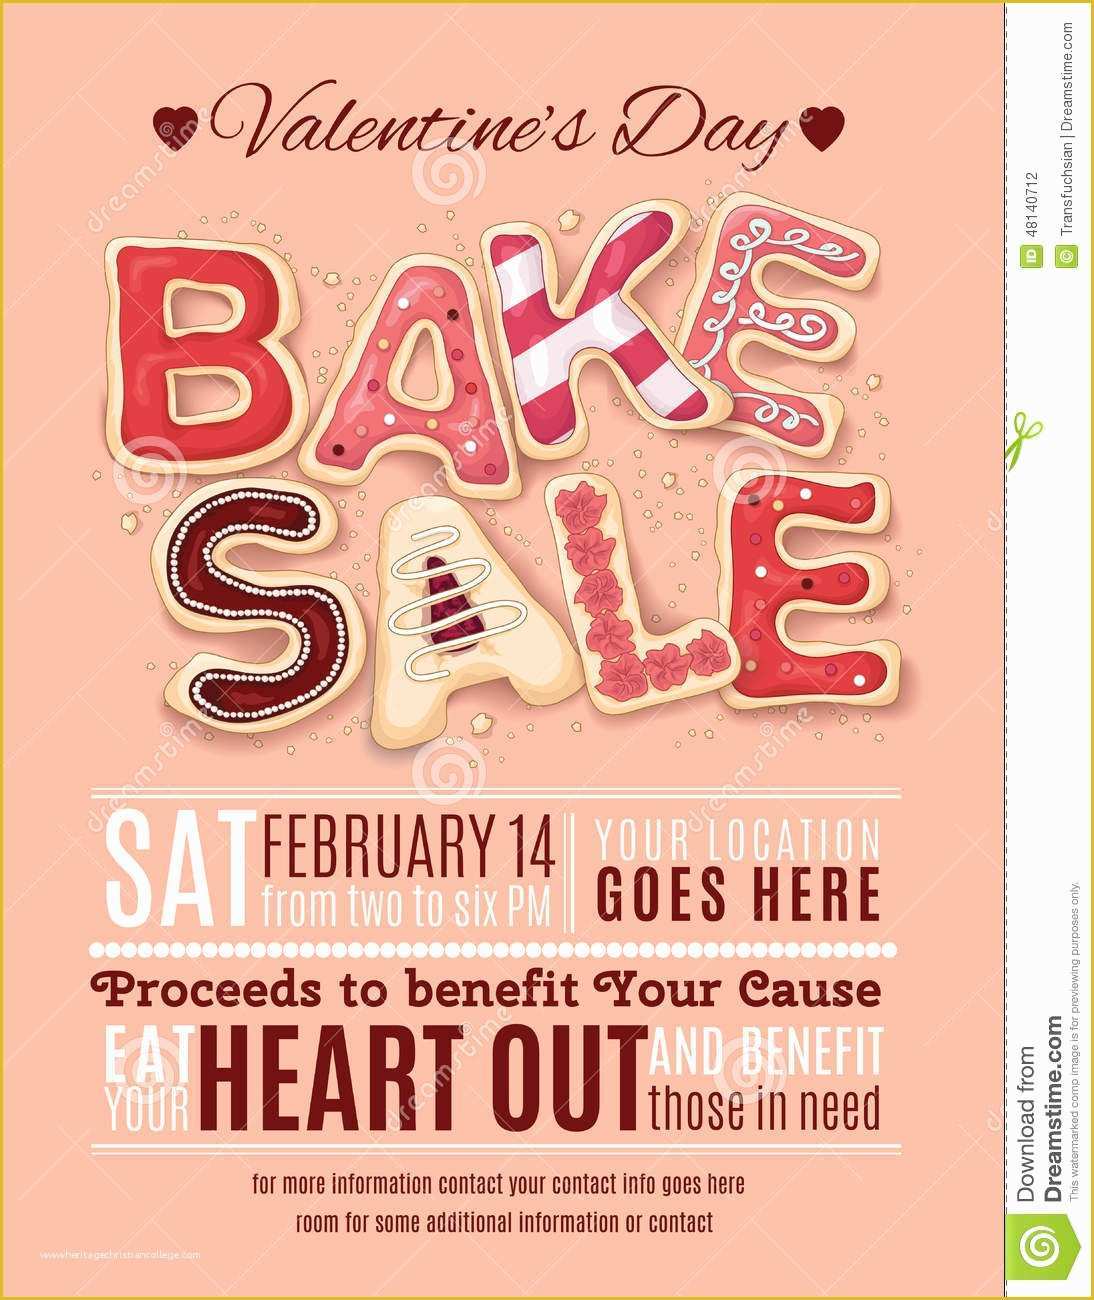 Bake Sale Flyer Template Free Of Valentines Day Bake Sale Flyer Template Stock Vector